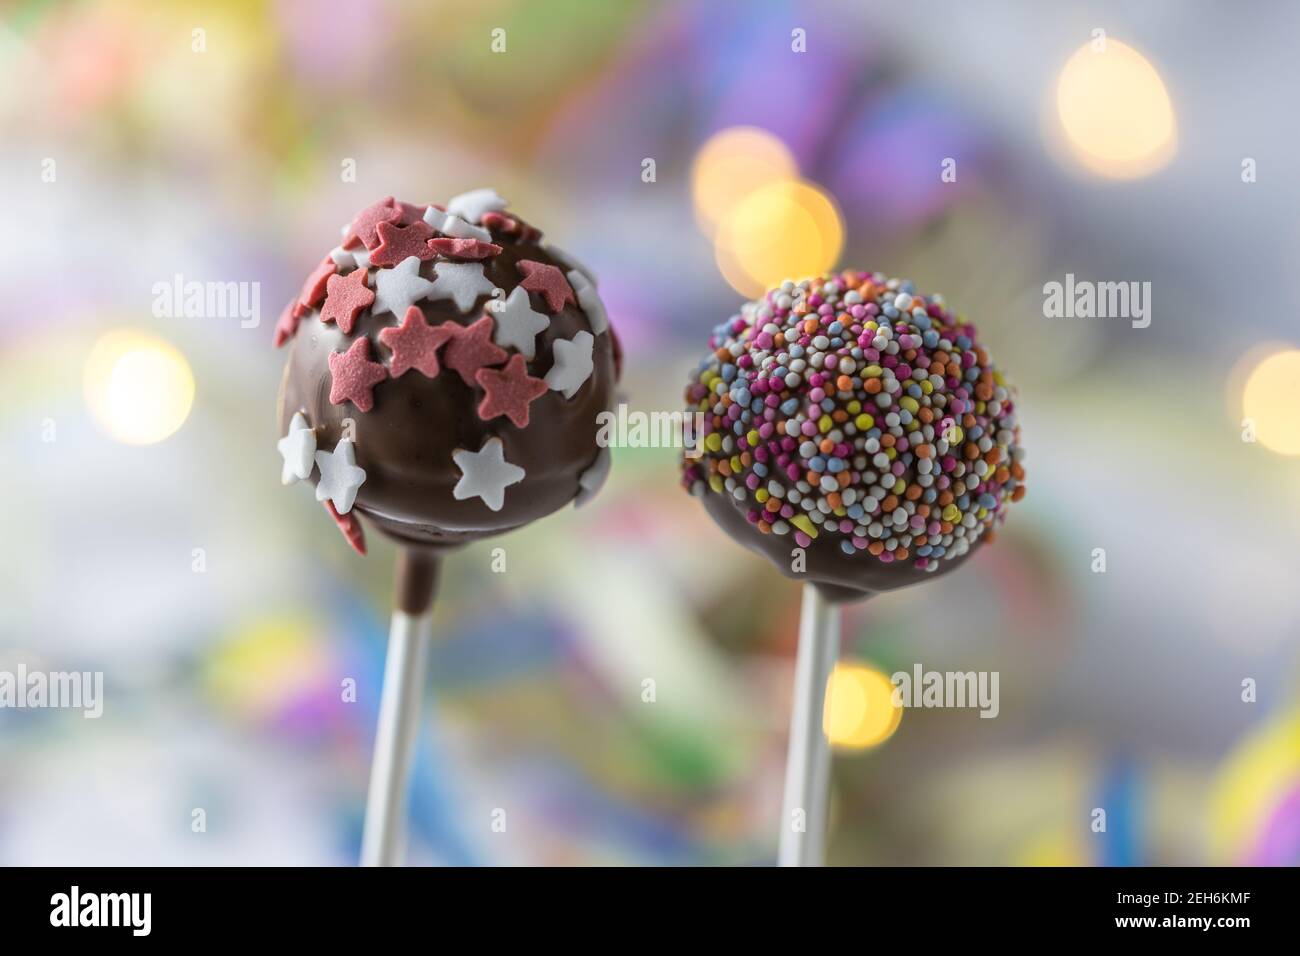 close up of two cake pops with chocolate and decoration with sugar in star shape, bokeh in the background Stock Photo